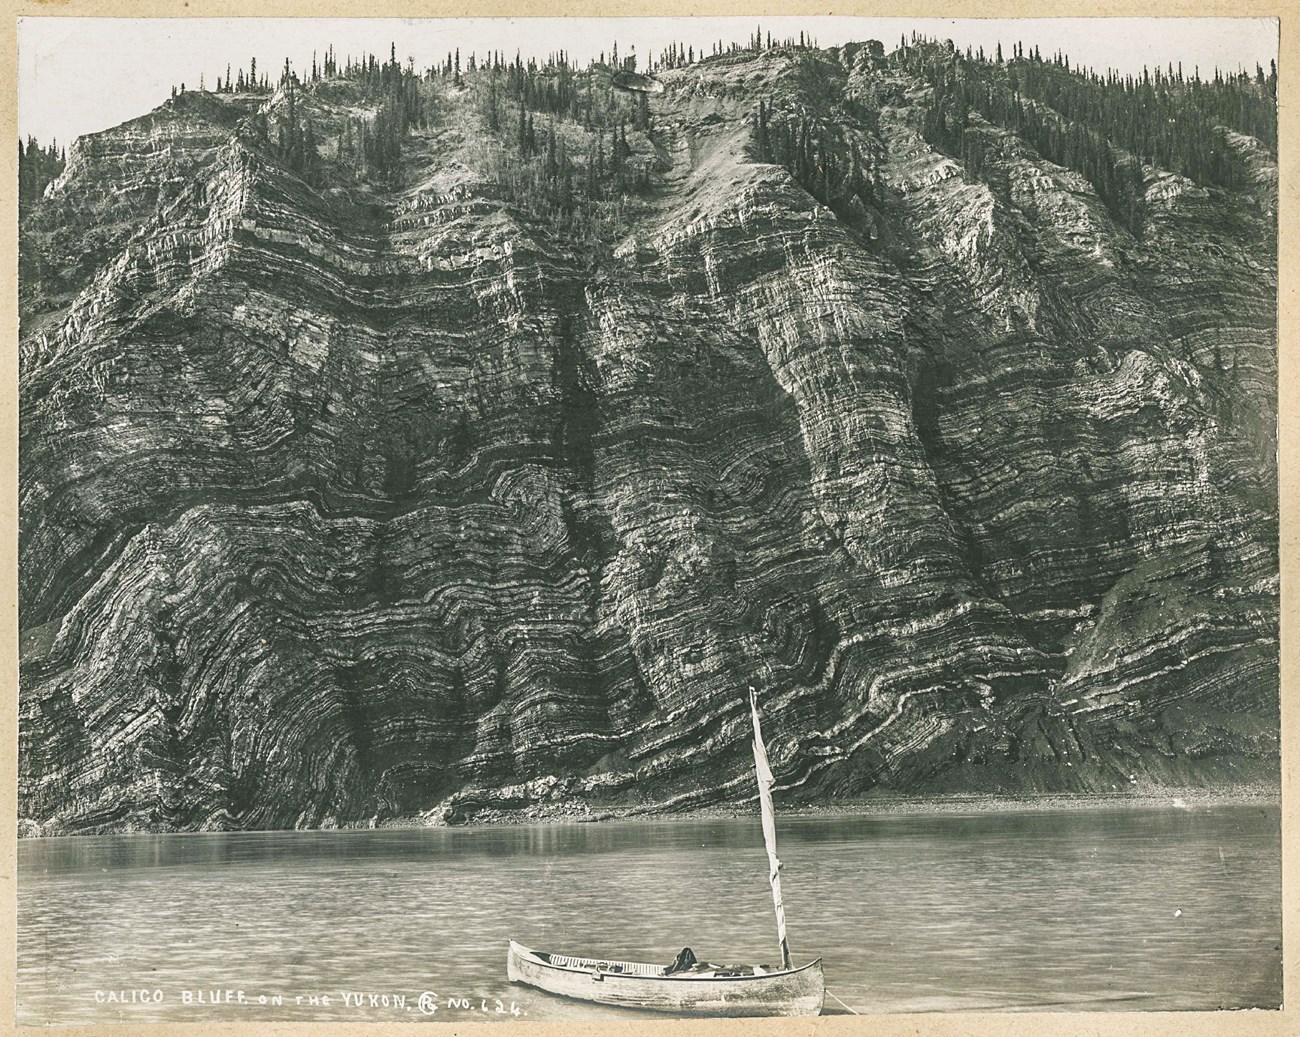 Historic photo of a canoe on shore in front of Calico Bluff